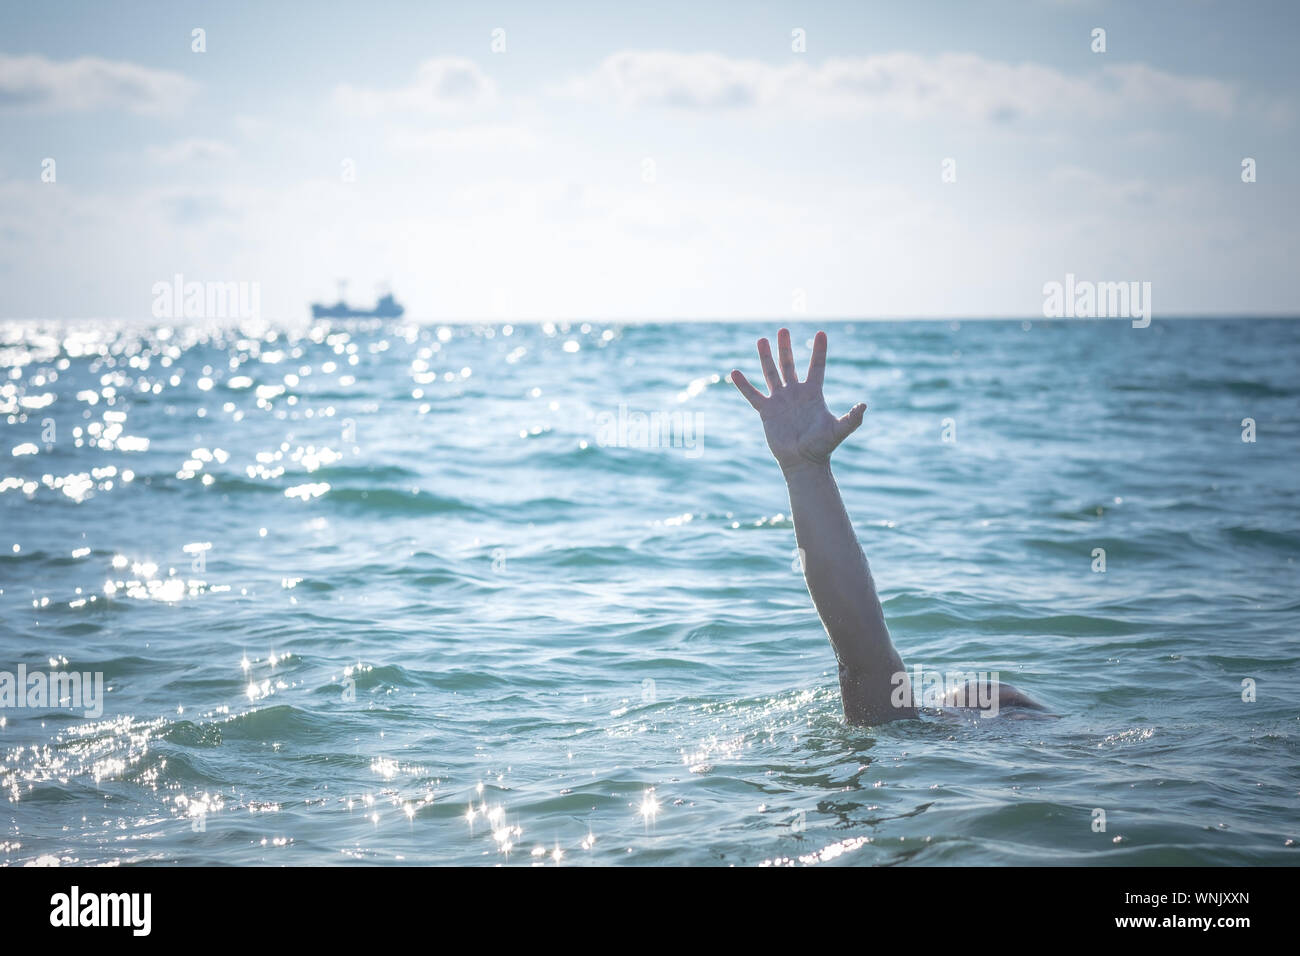 single hand of drowning man in sea asking for help. sticking out of the water Stock Photo